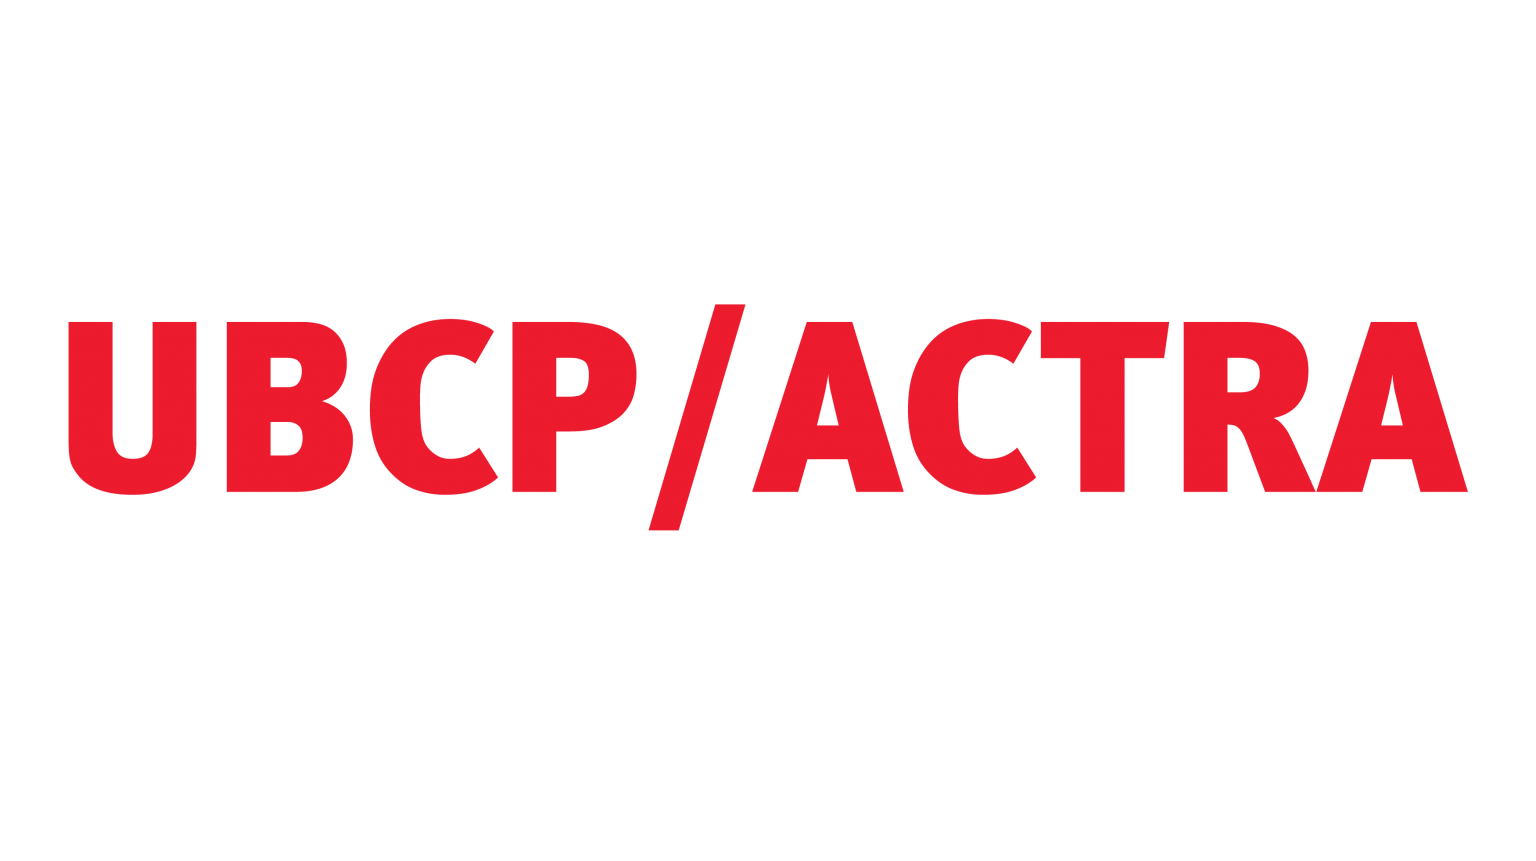 UBCP/ACTRA